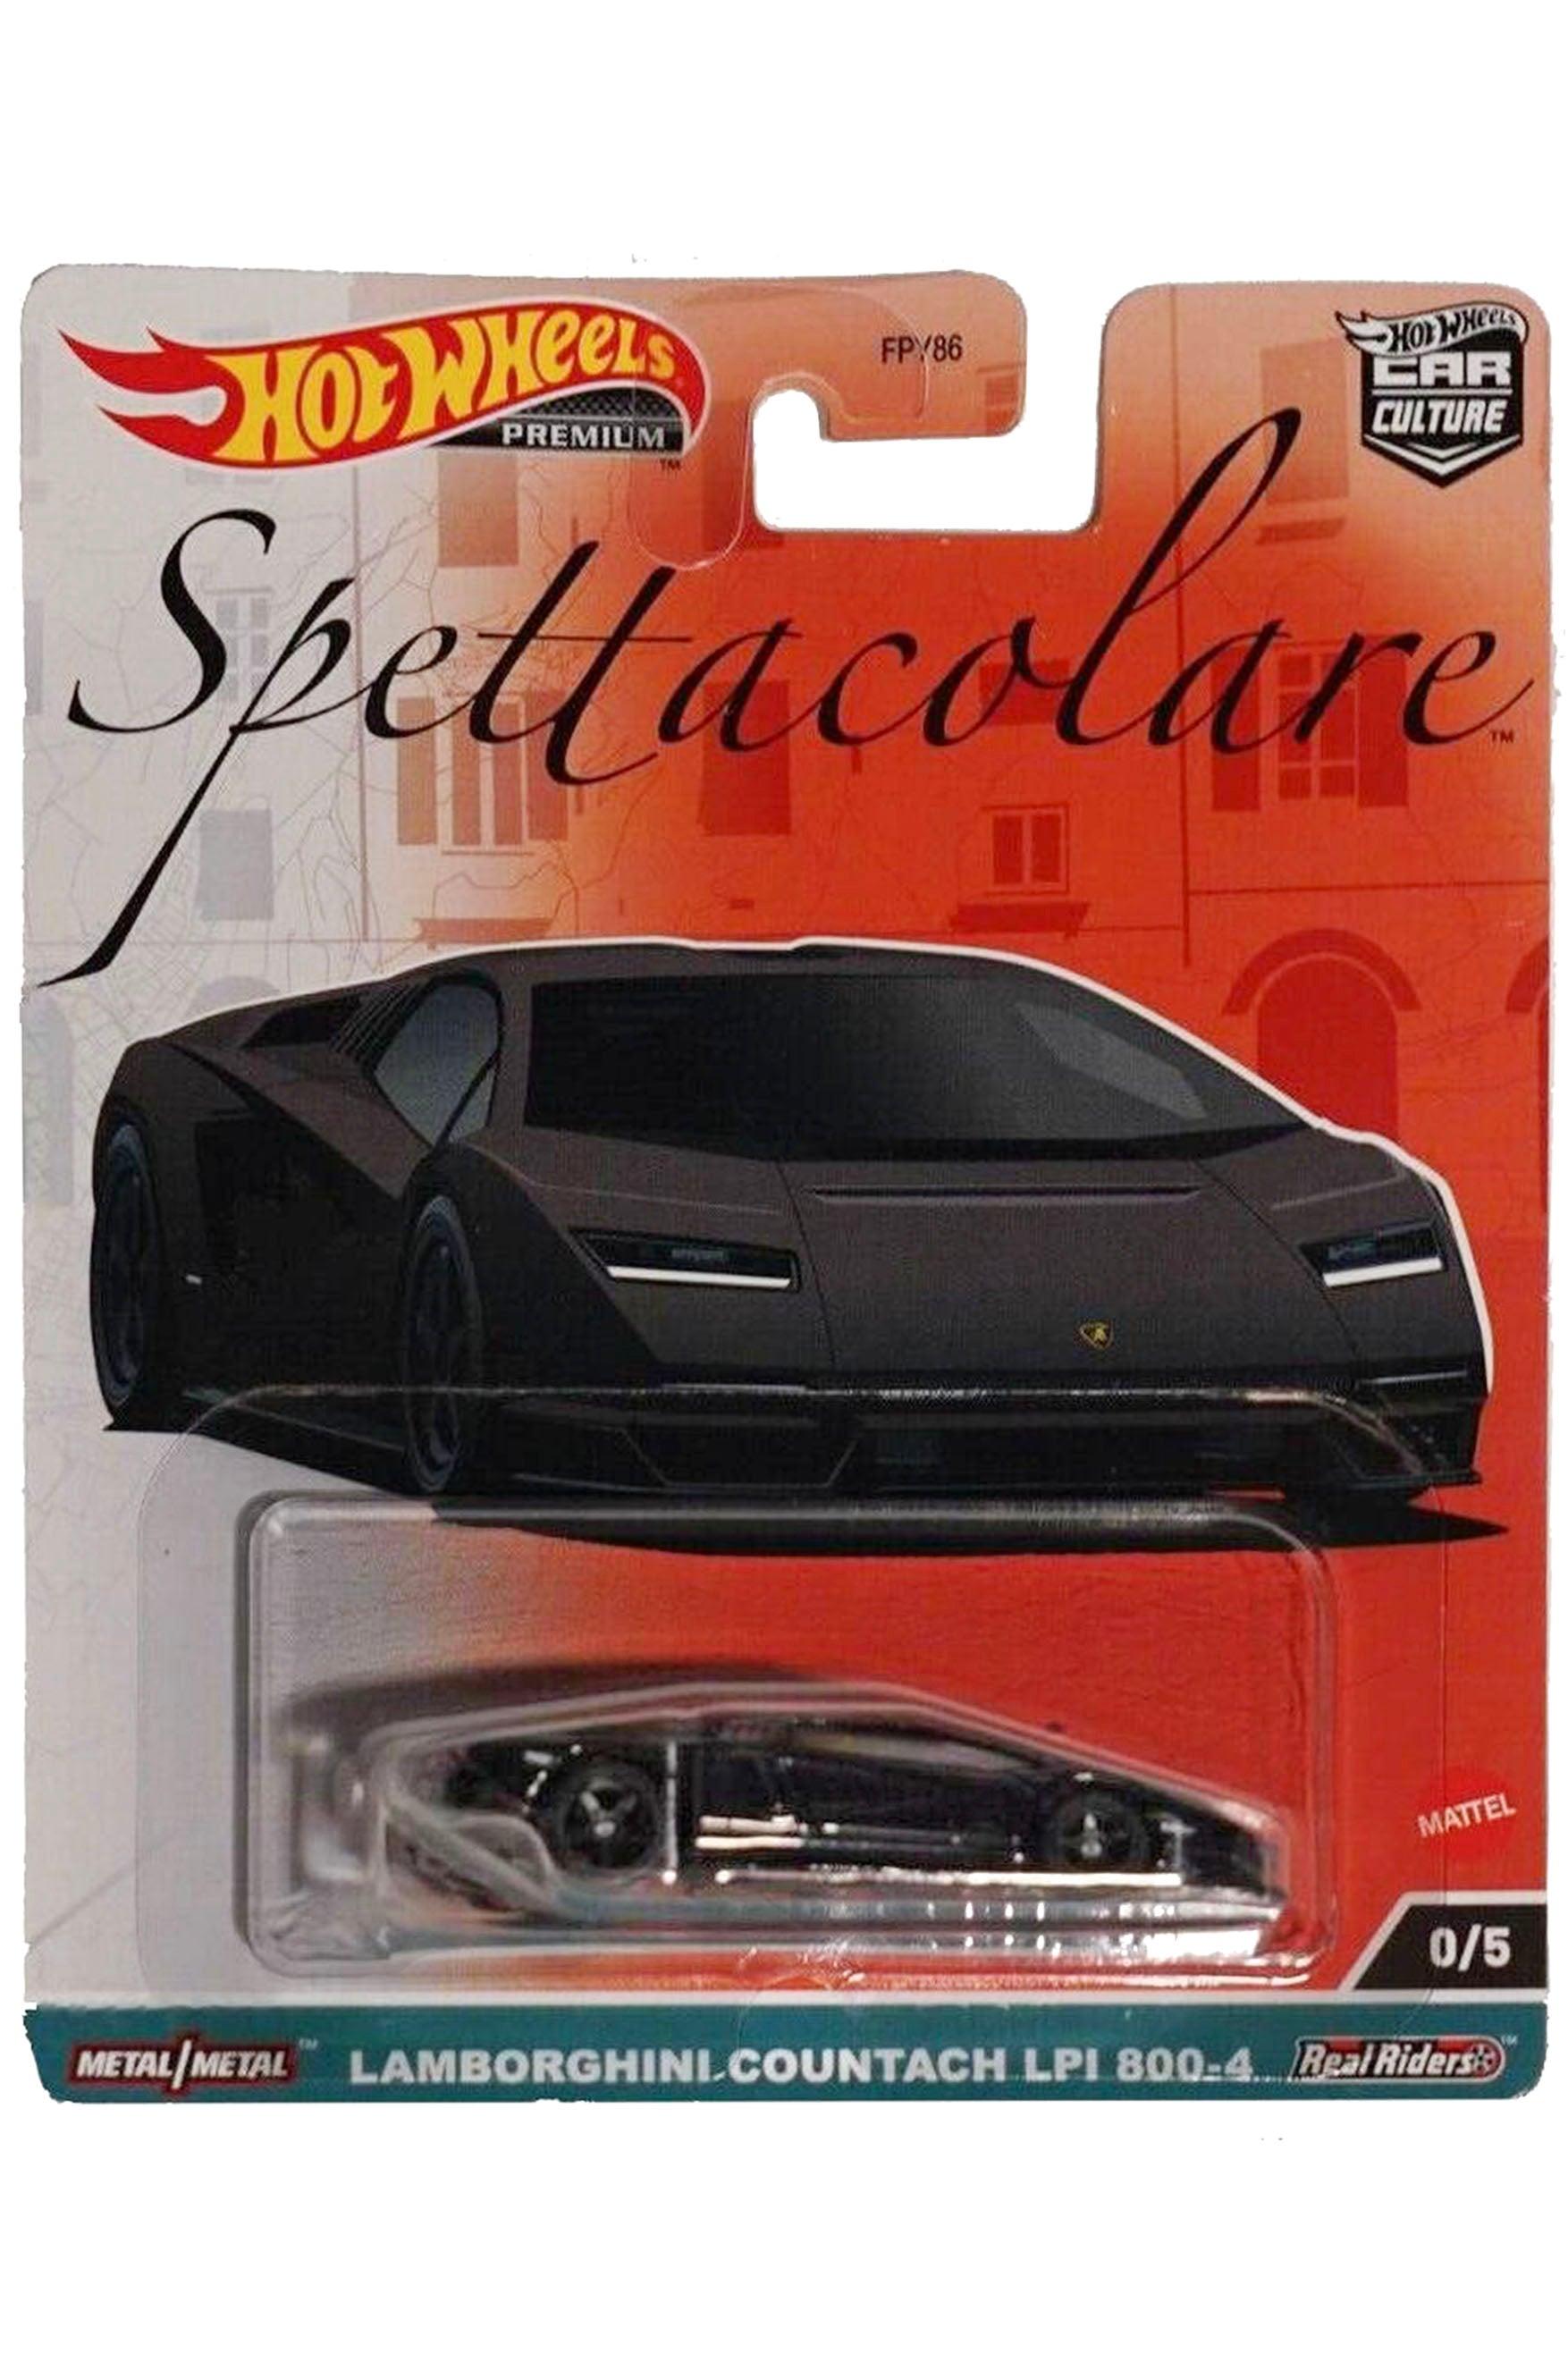 [CHASE] 2023 Hot Wheels Car Culture Spettacolare Lambo Countach - EverydayThreads